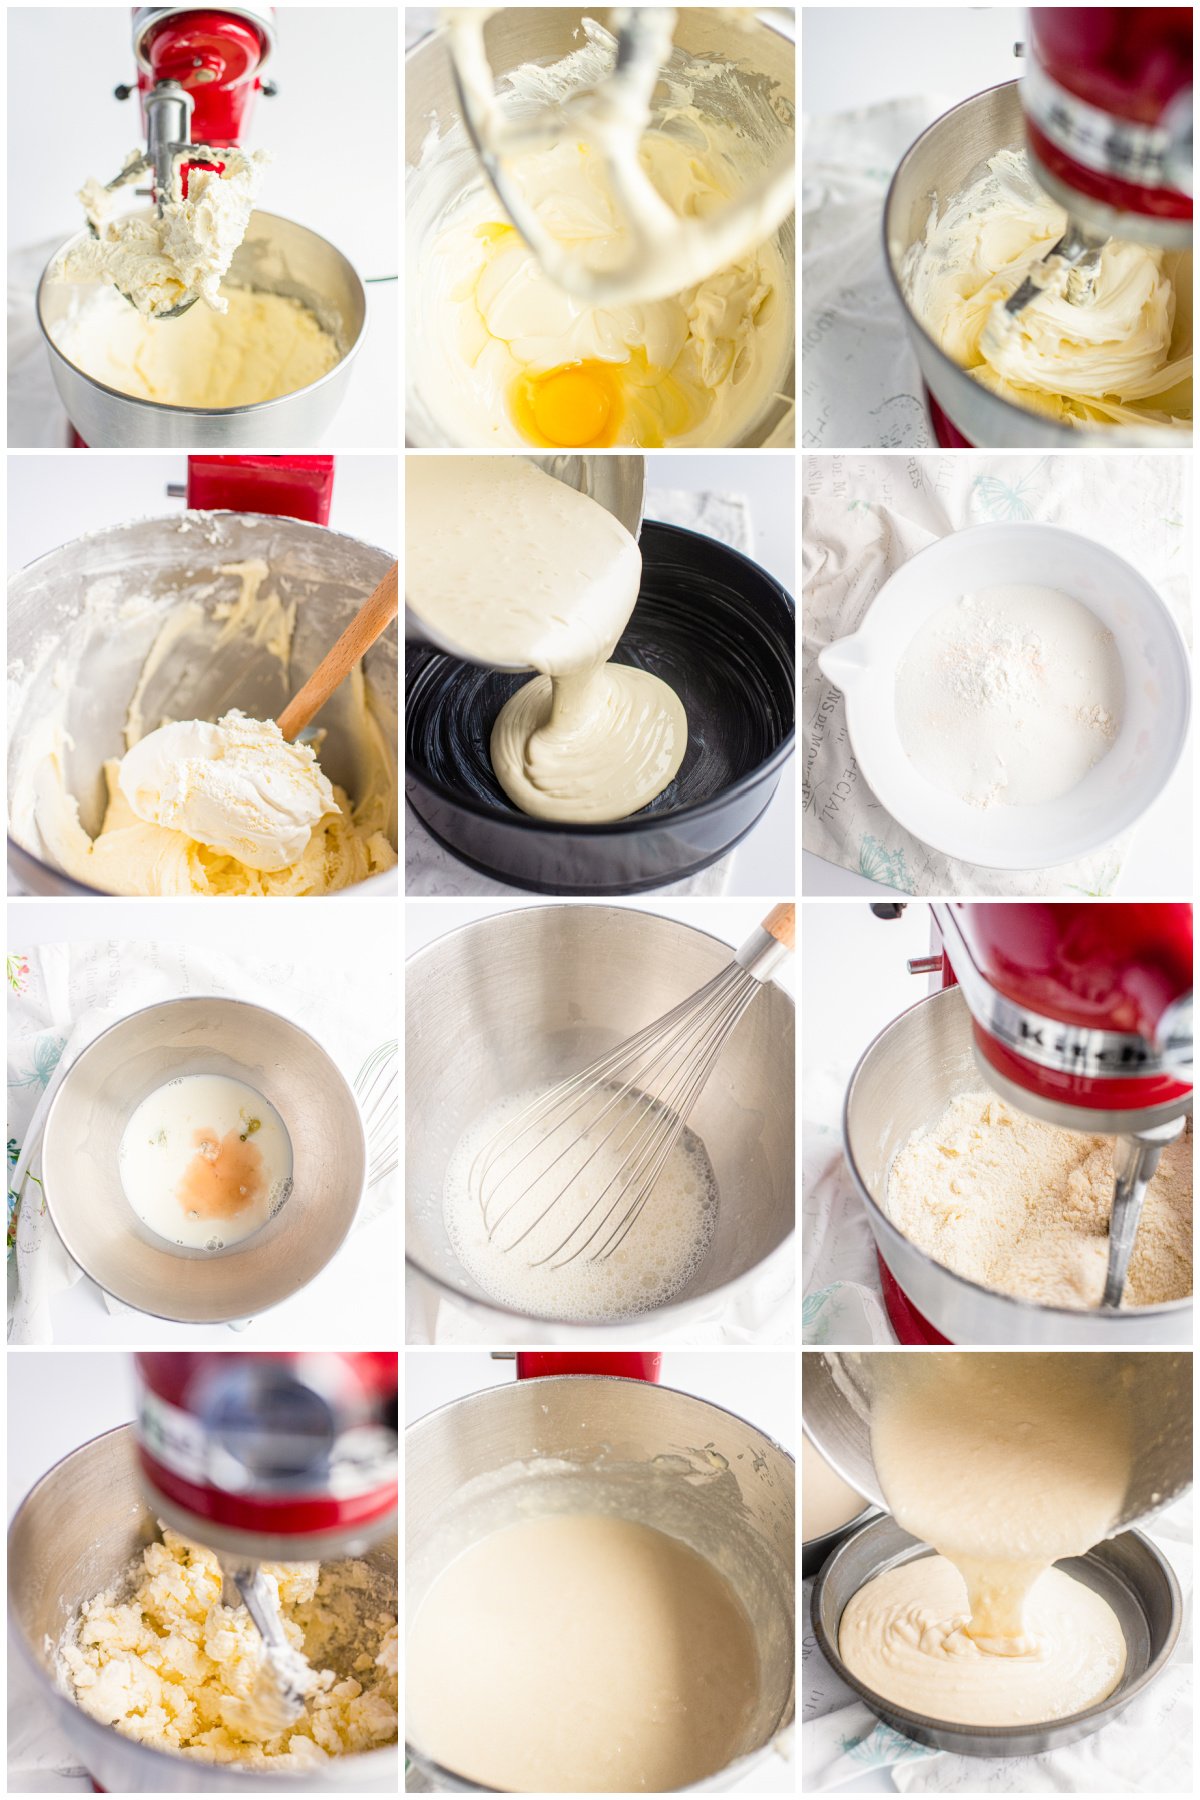 Step by step photos on how to make a Cheesecake Cake